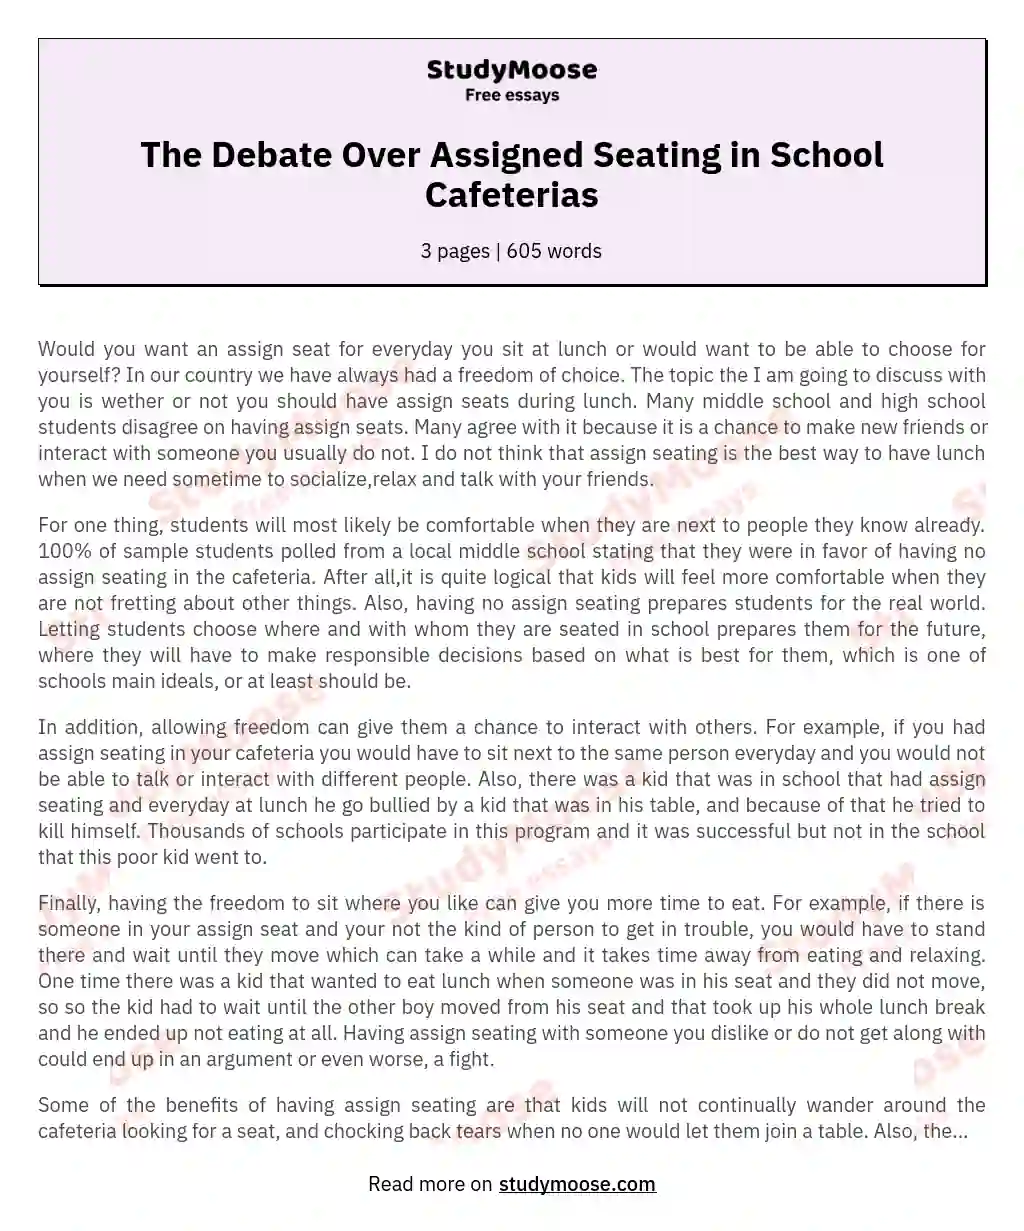 The Debate Over Assigned Seating in School Cafeterias essay